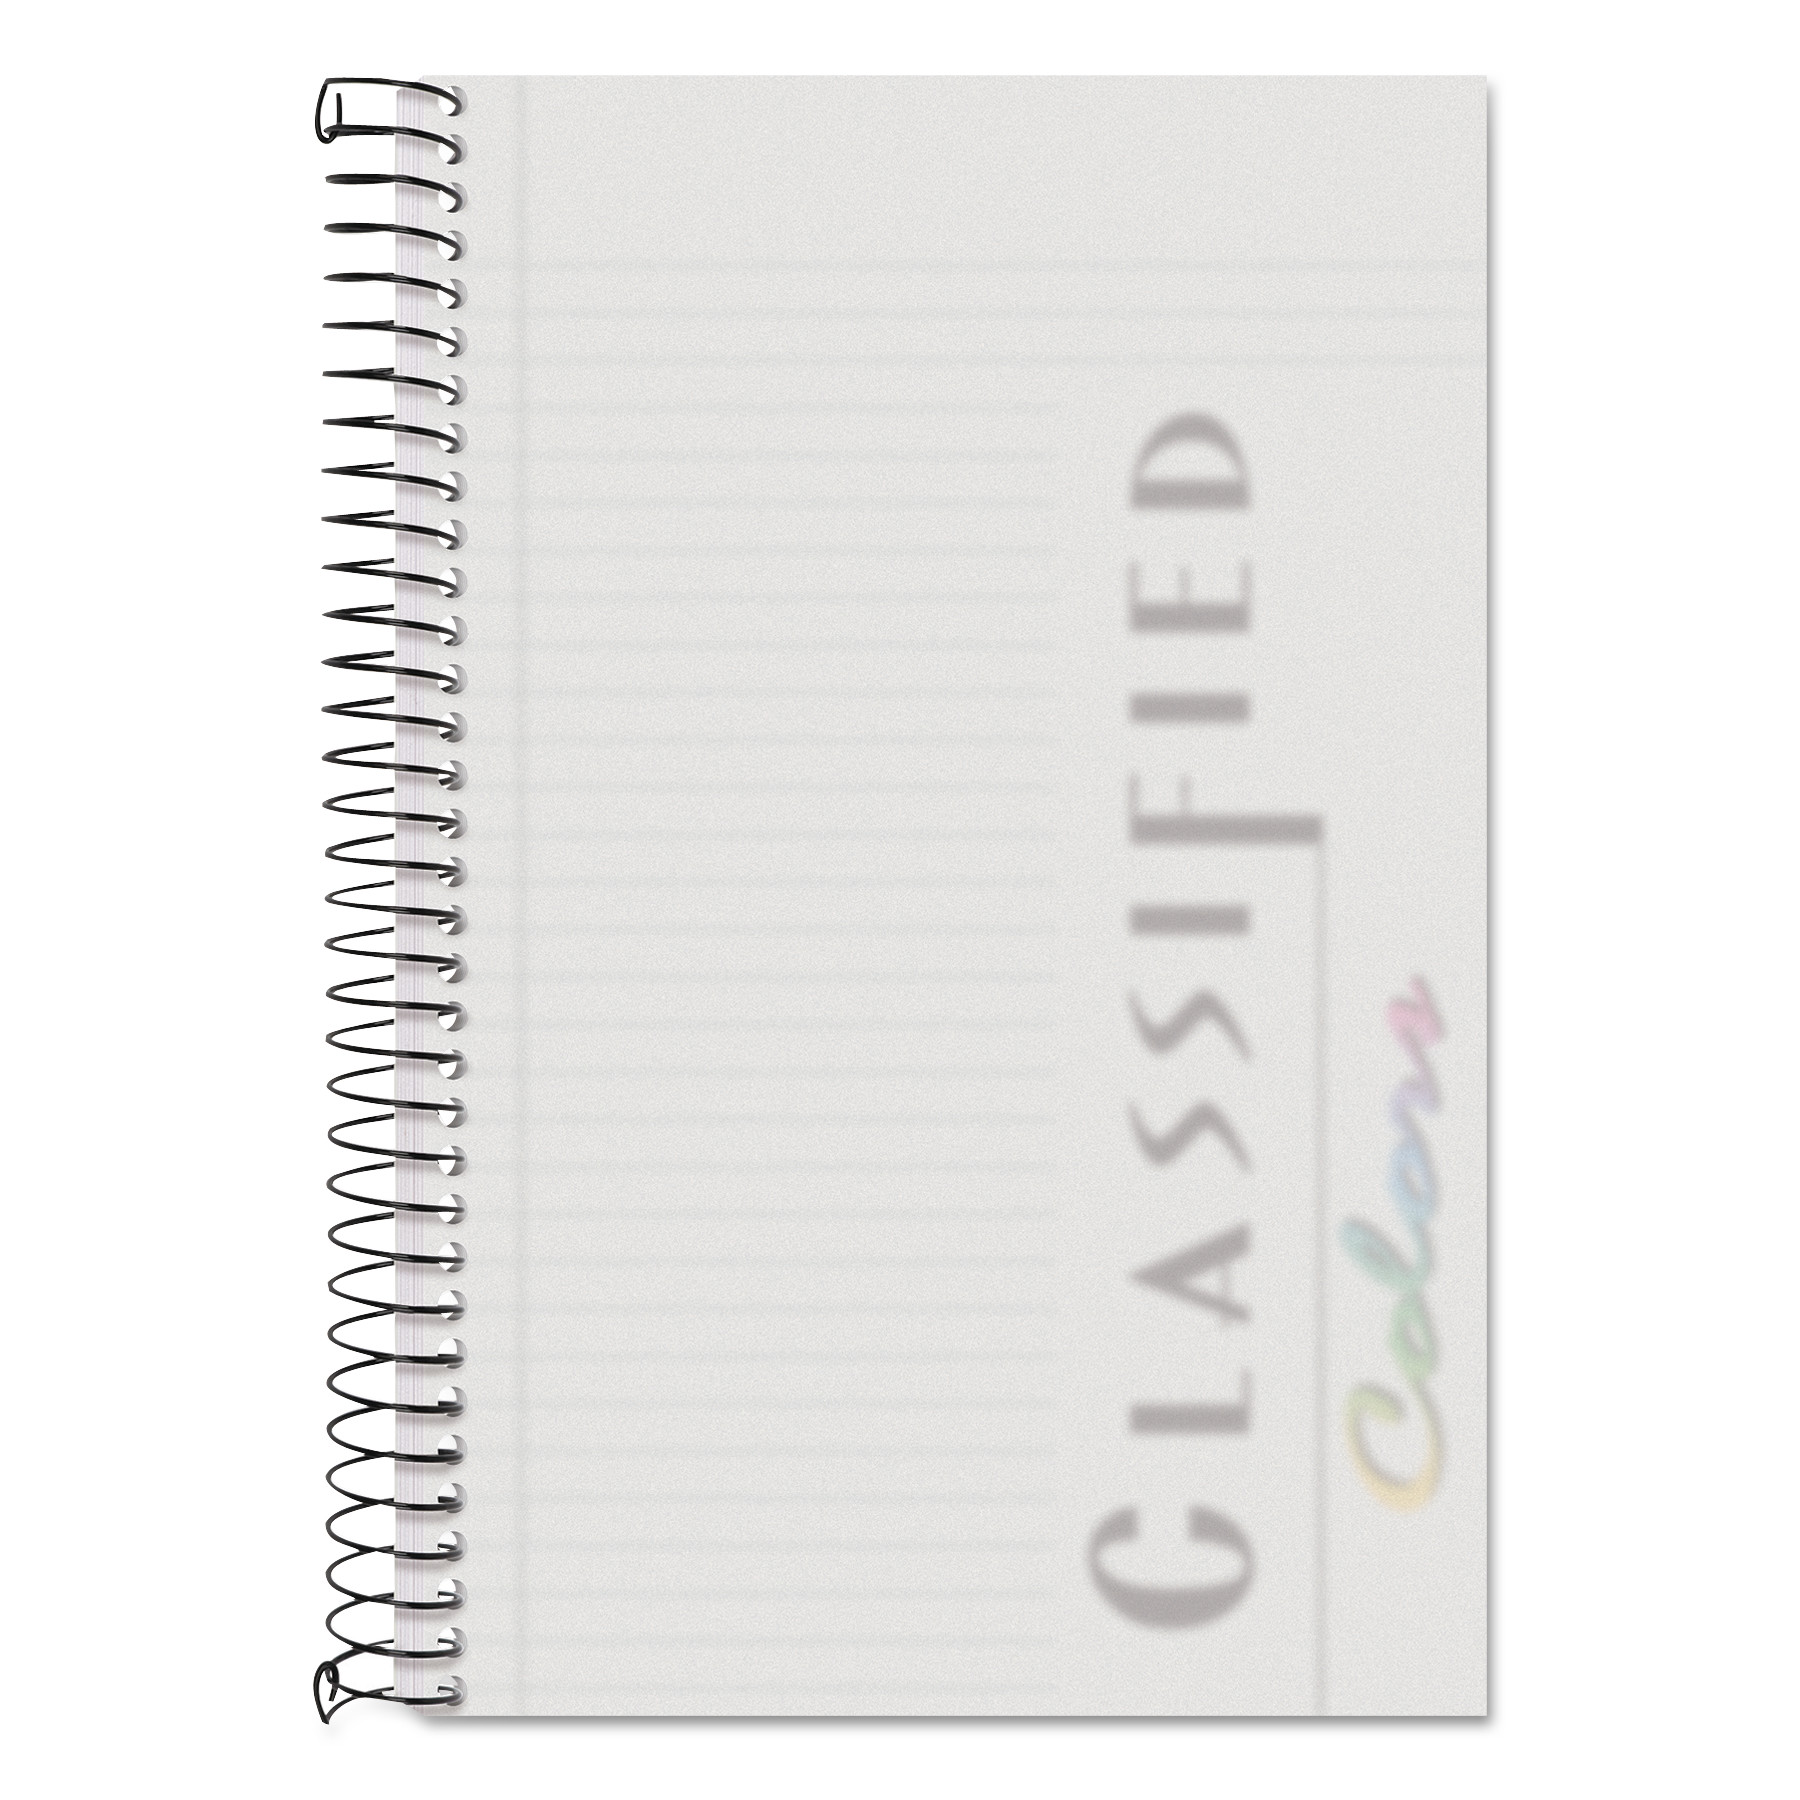  TOPS 99711 Color Notebooks, 1 Subject, Narrow Rule, Frosted Cover, 8.5 x 5.5, 100 Sheets (TOP99711) 